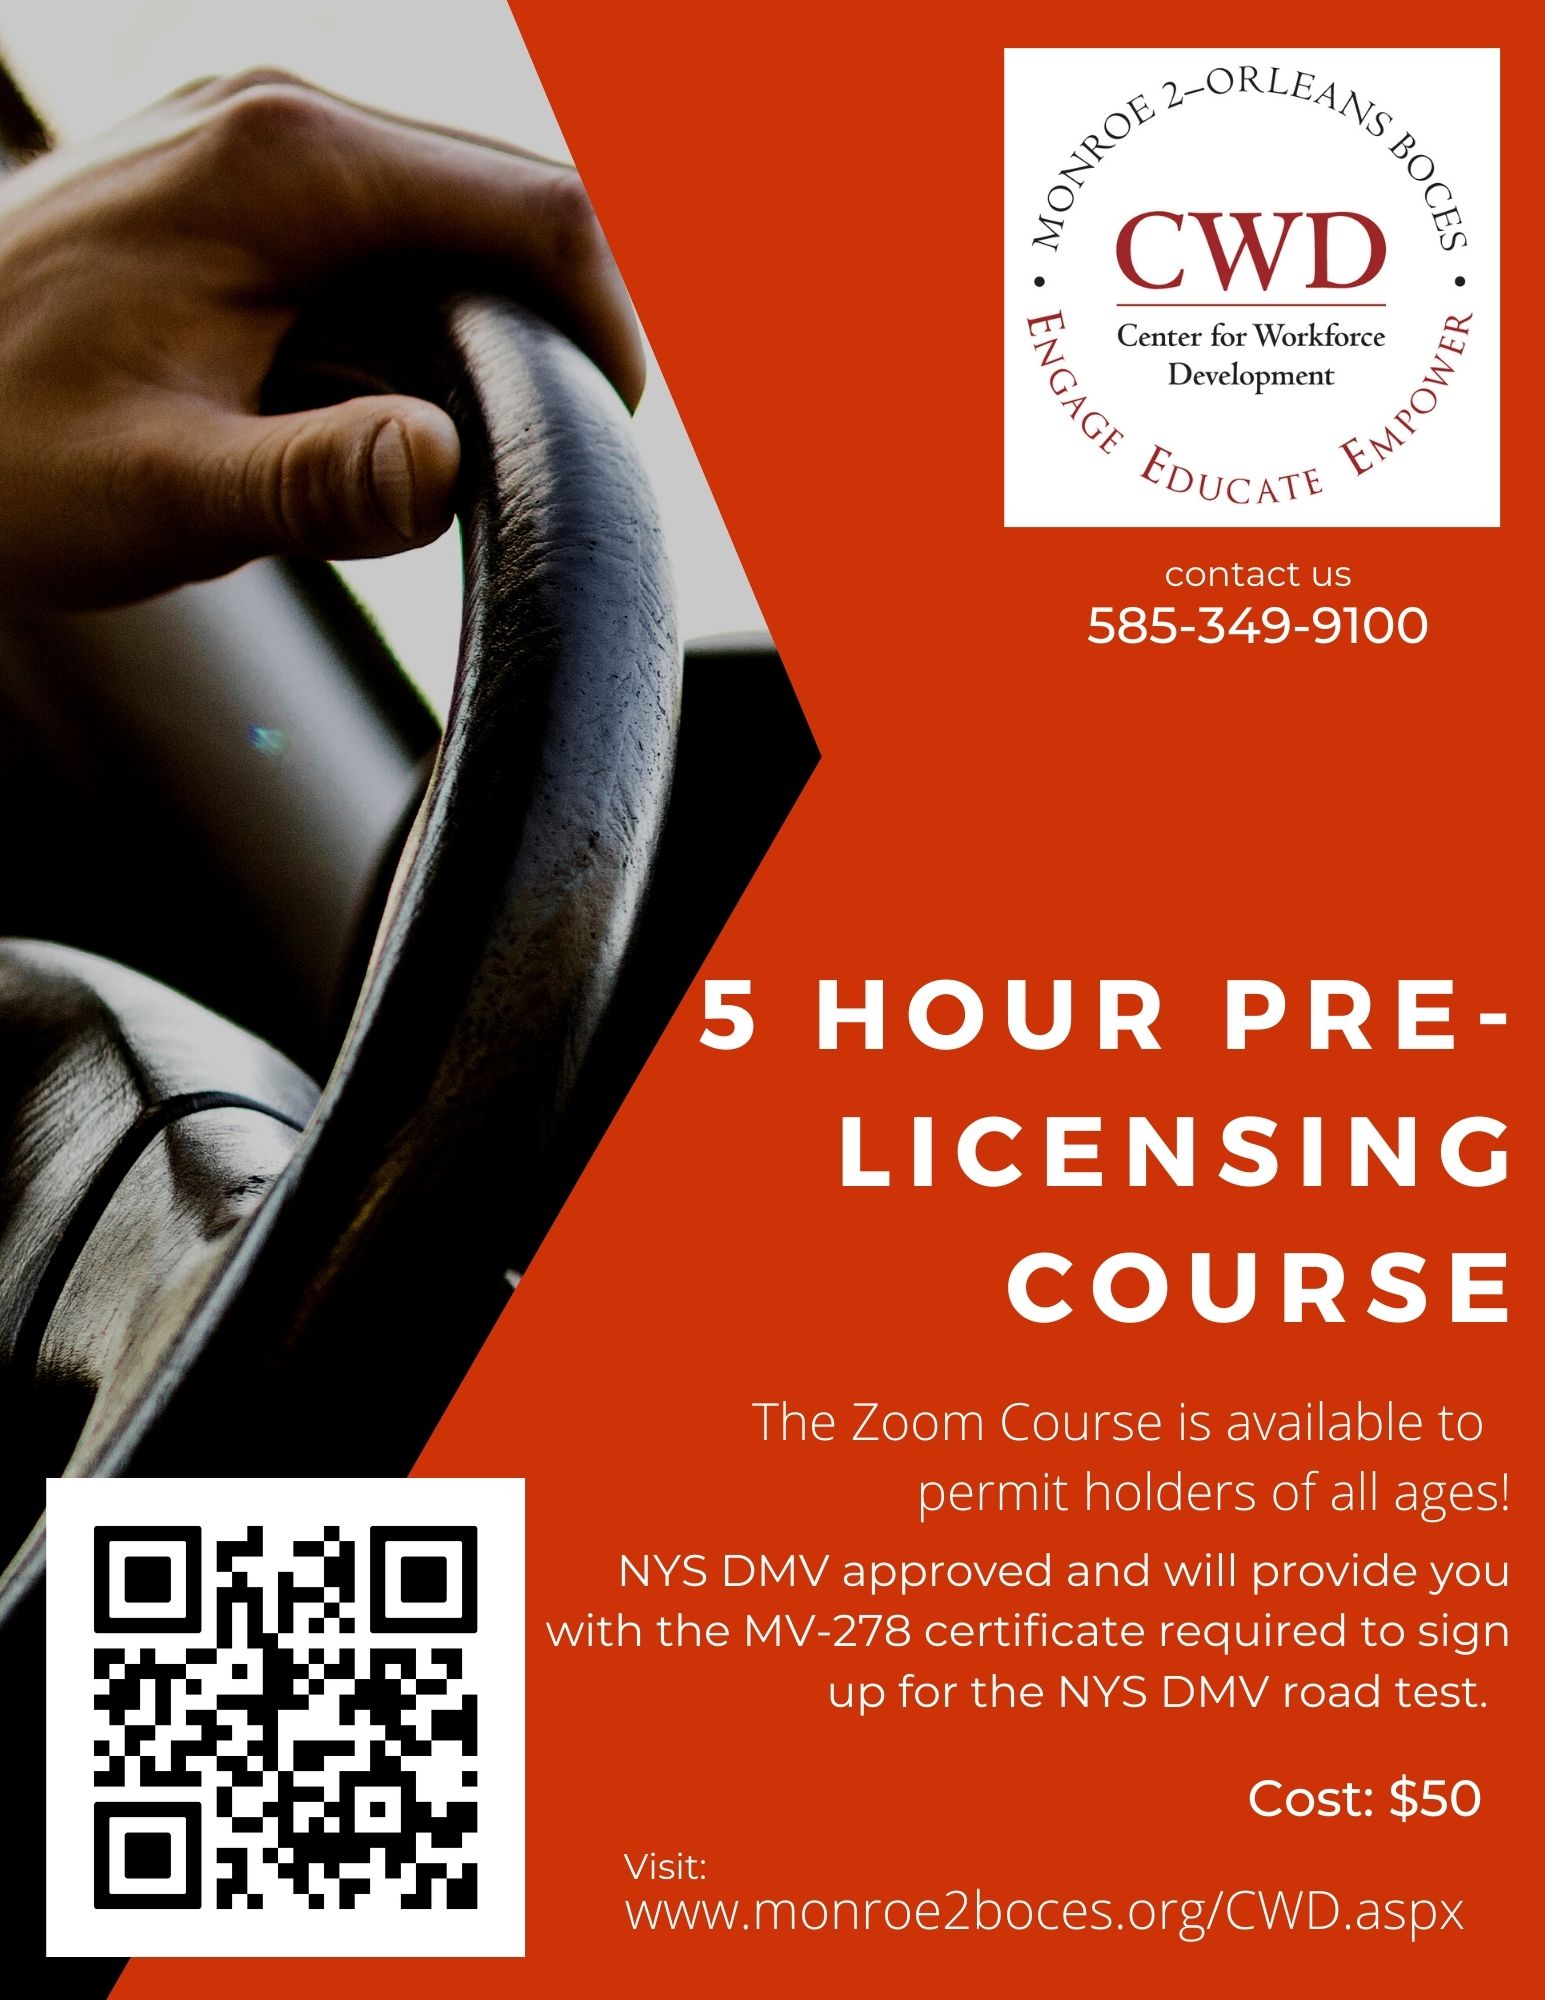 CWD Pre-Licensing Course flyer image